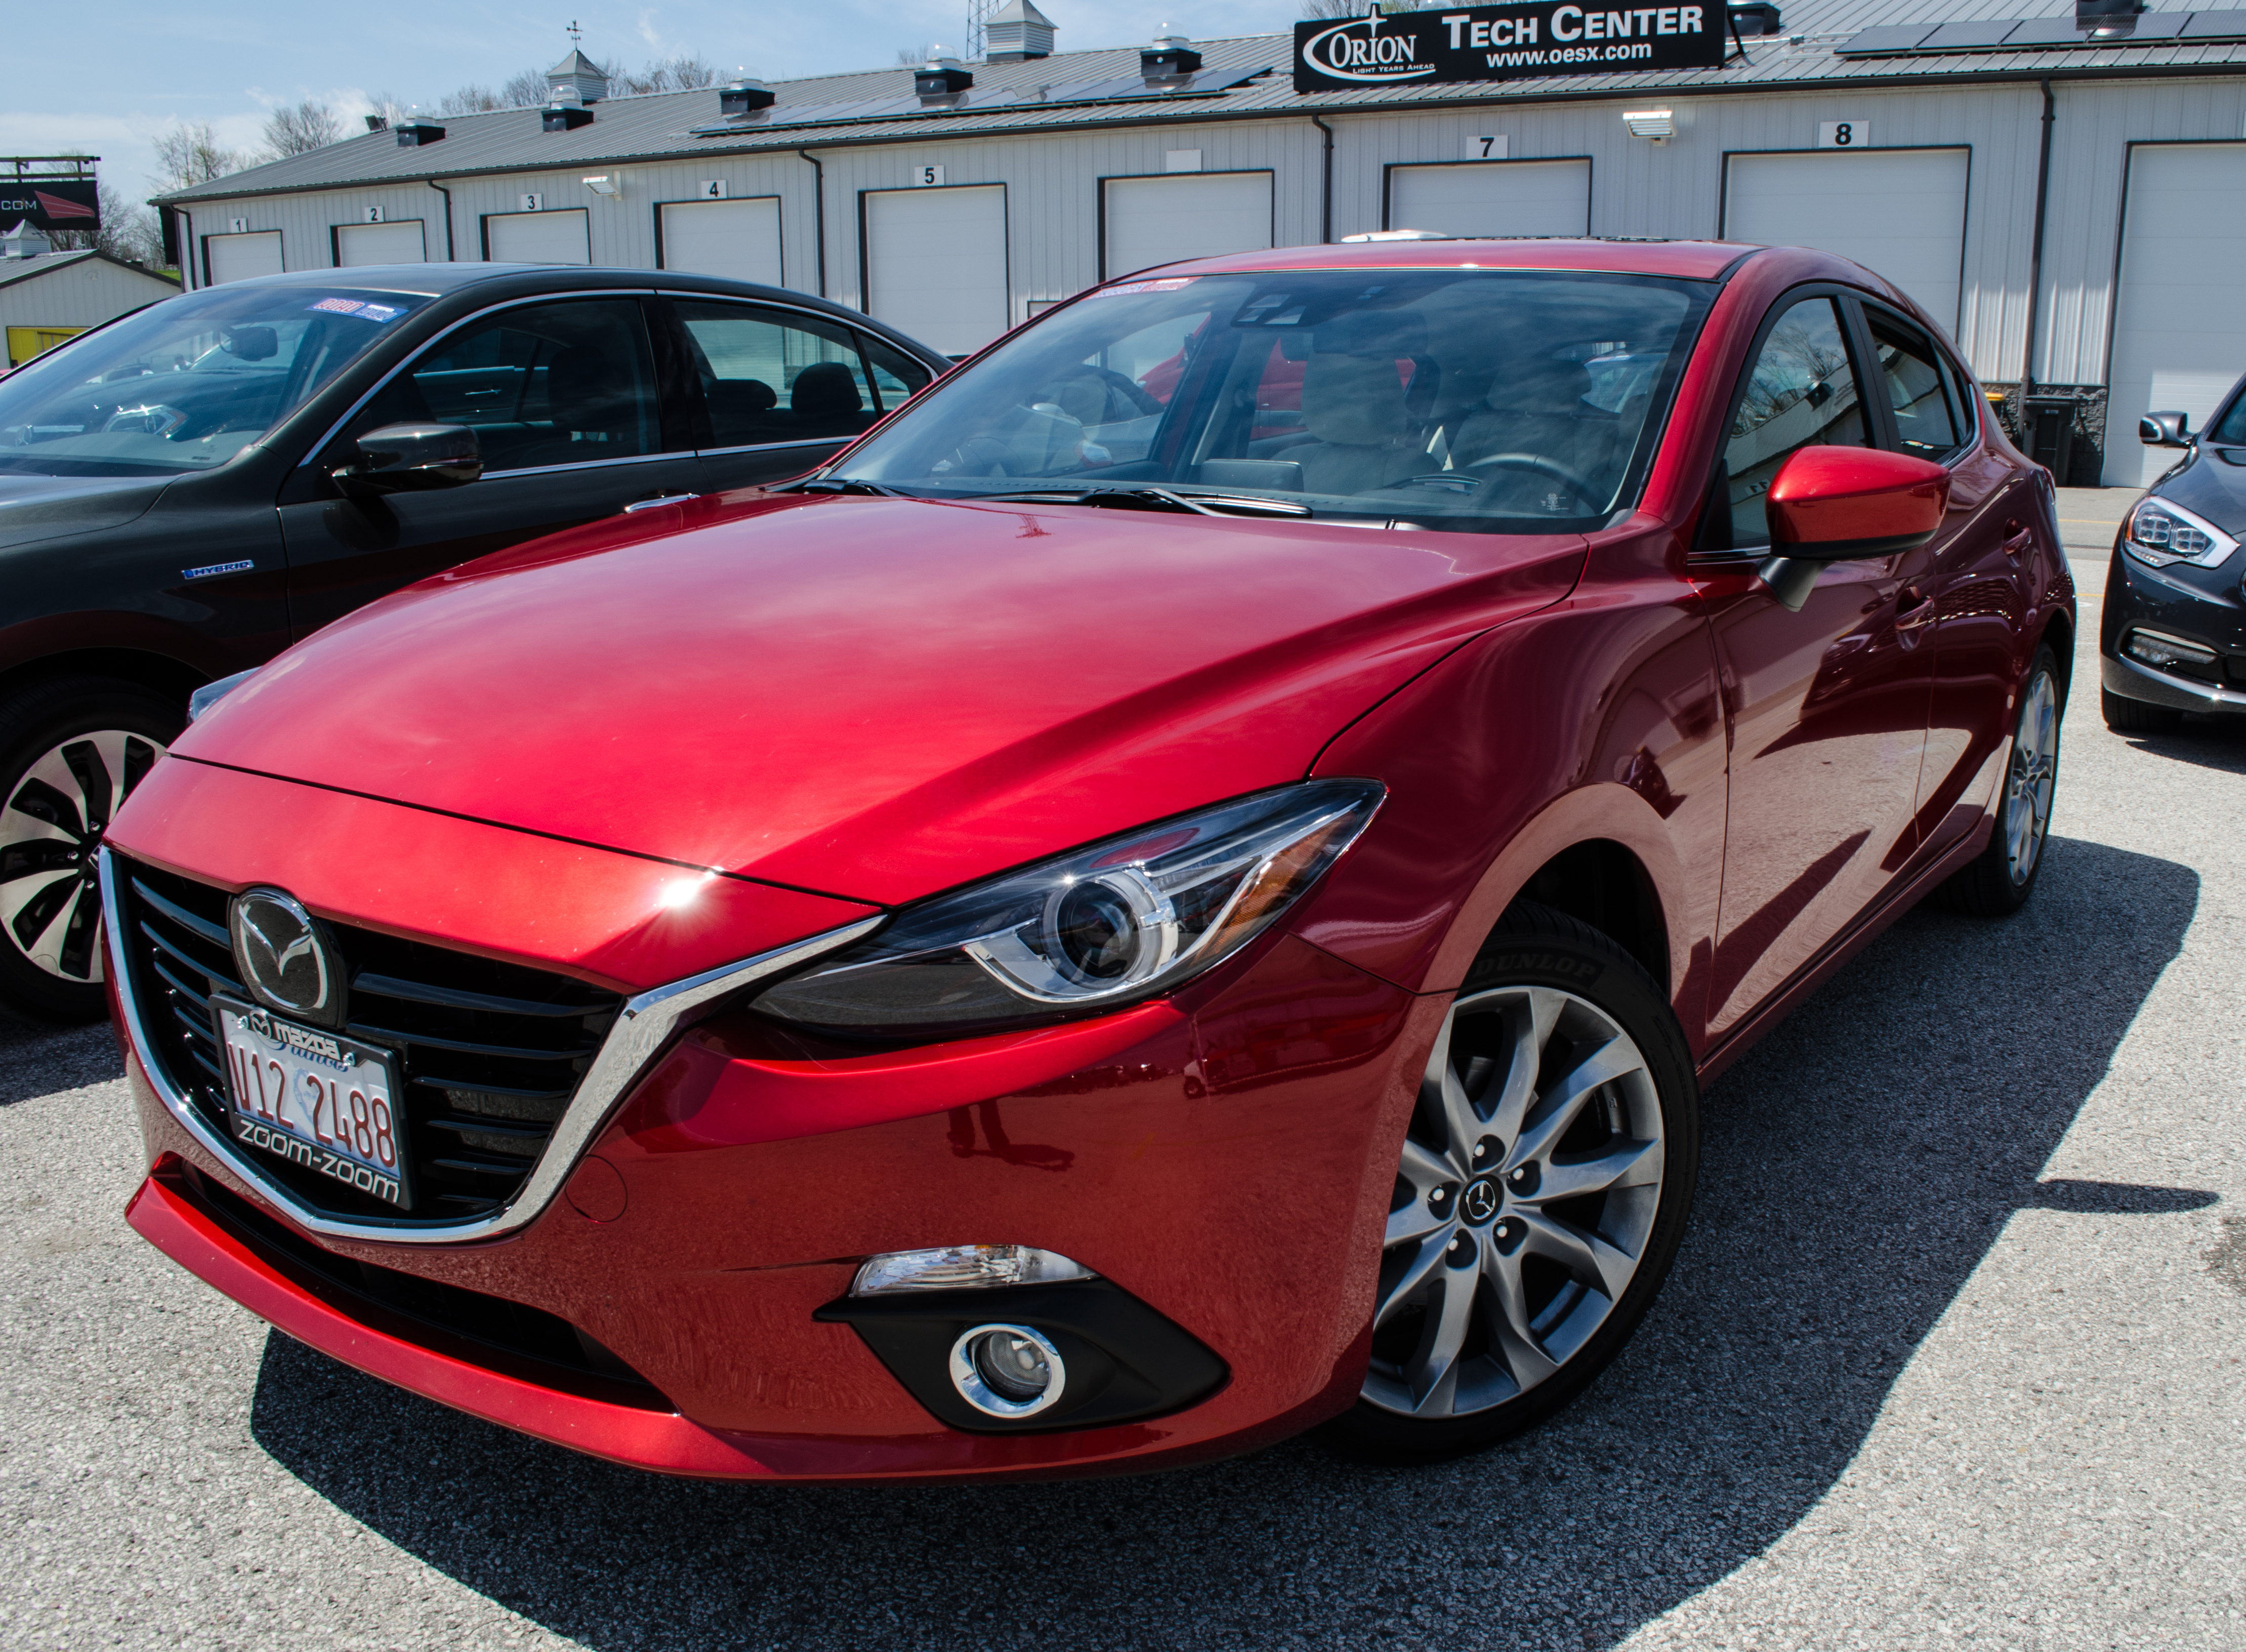 2014 Mazda Mazda3: Affordable Safety and Technology